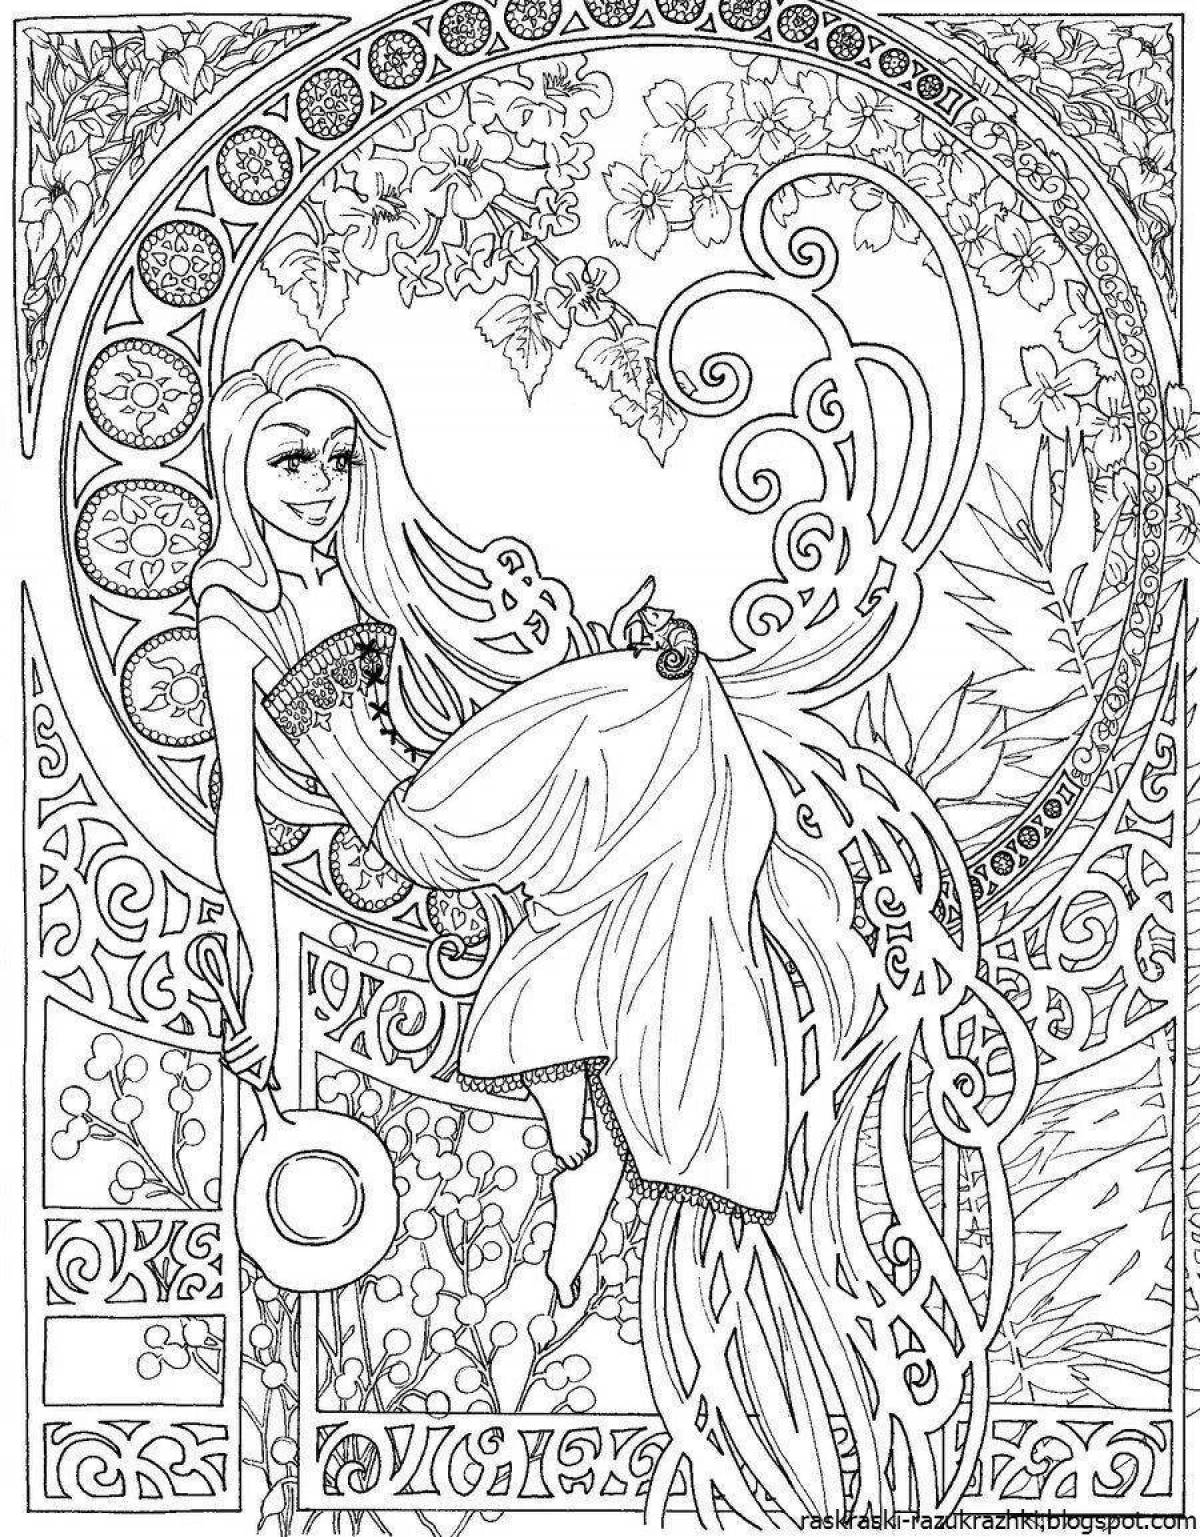 Creative coloring book small for girls